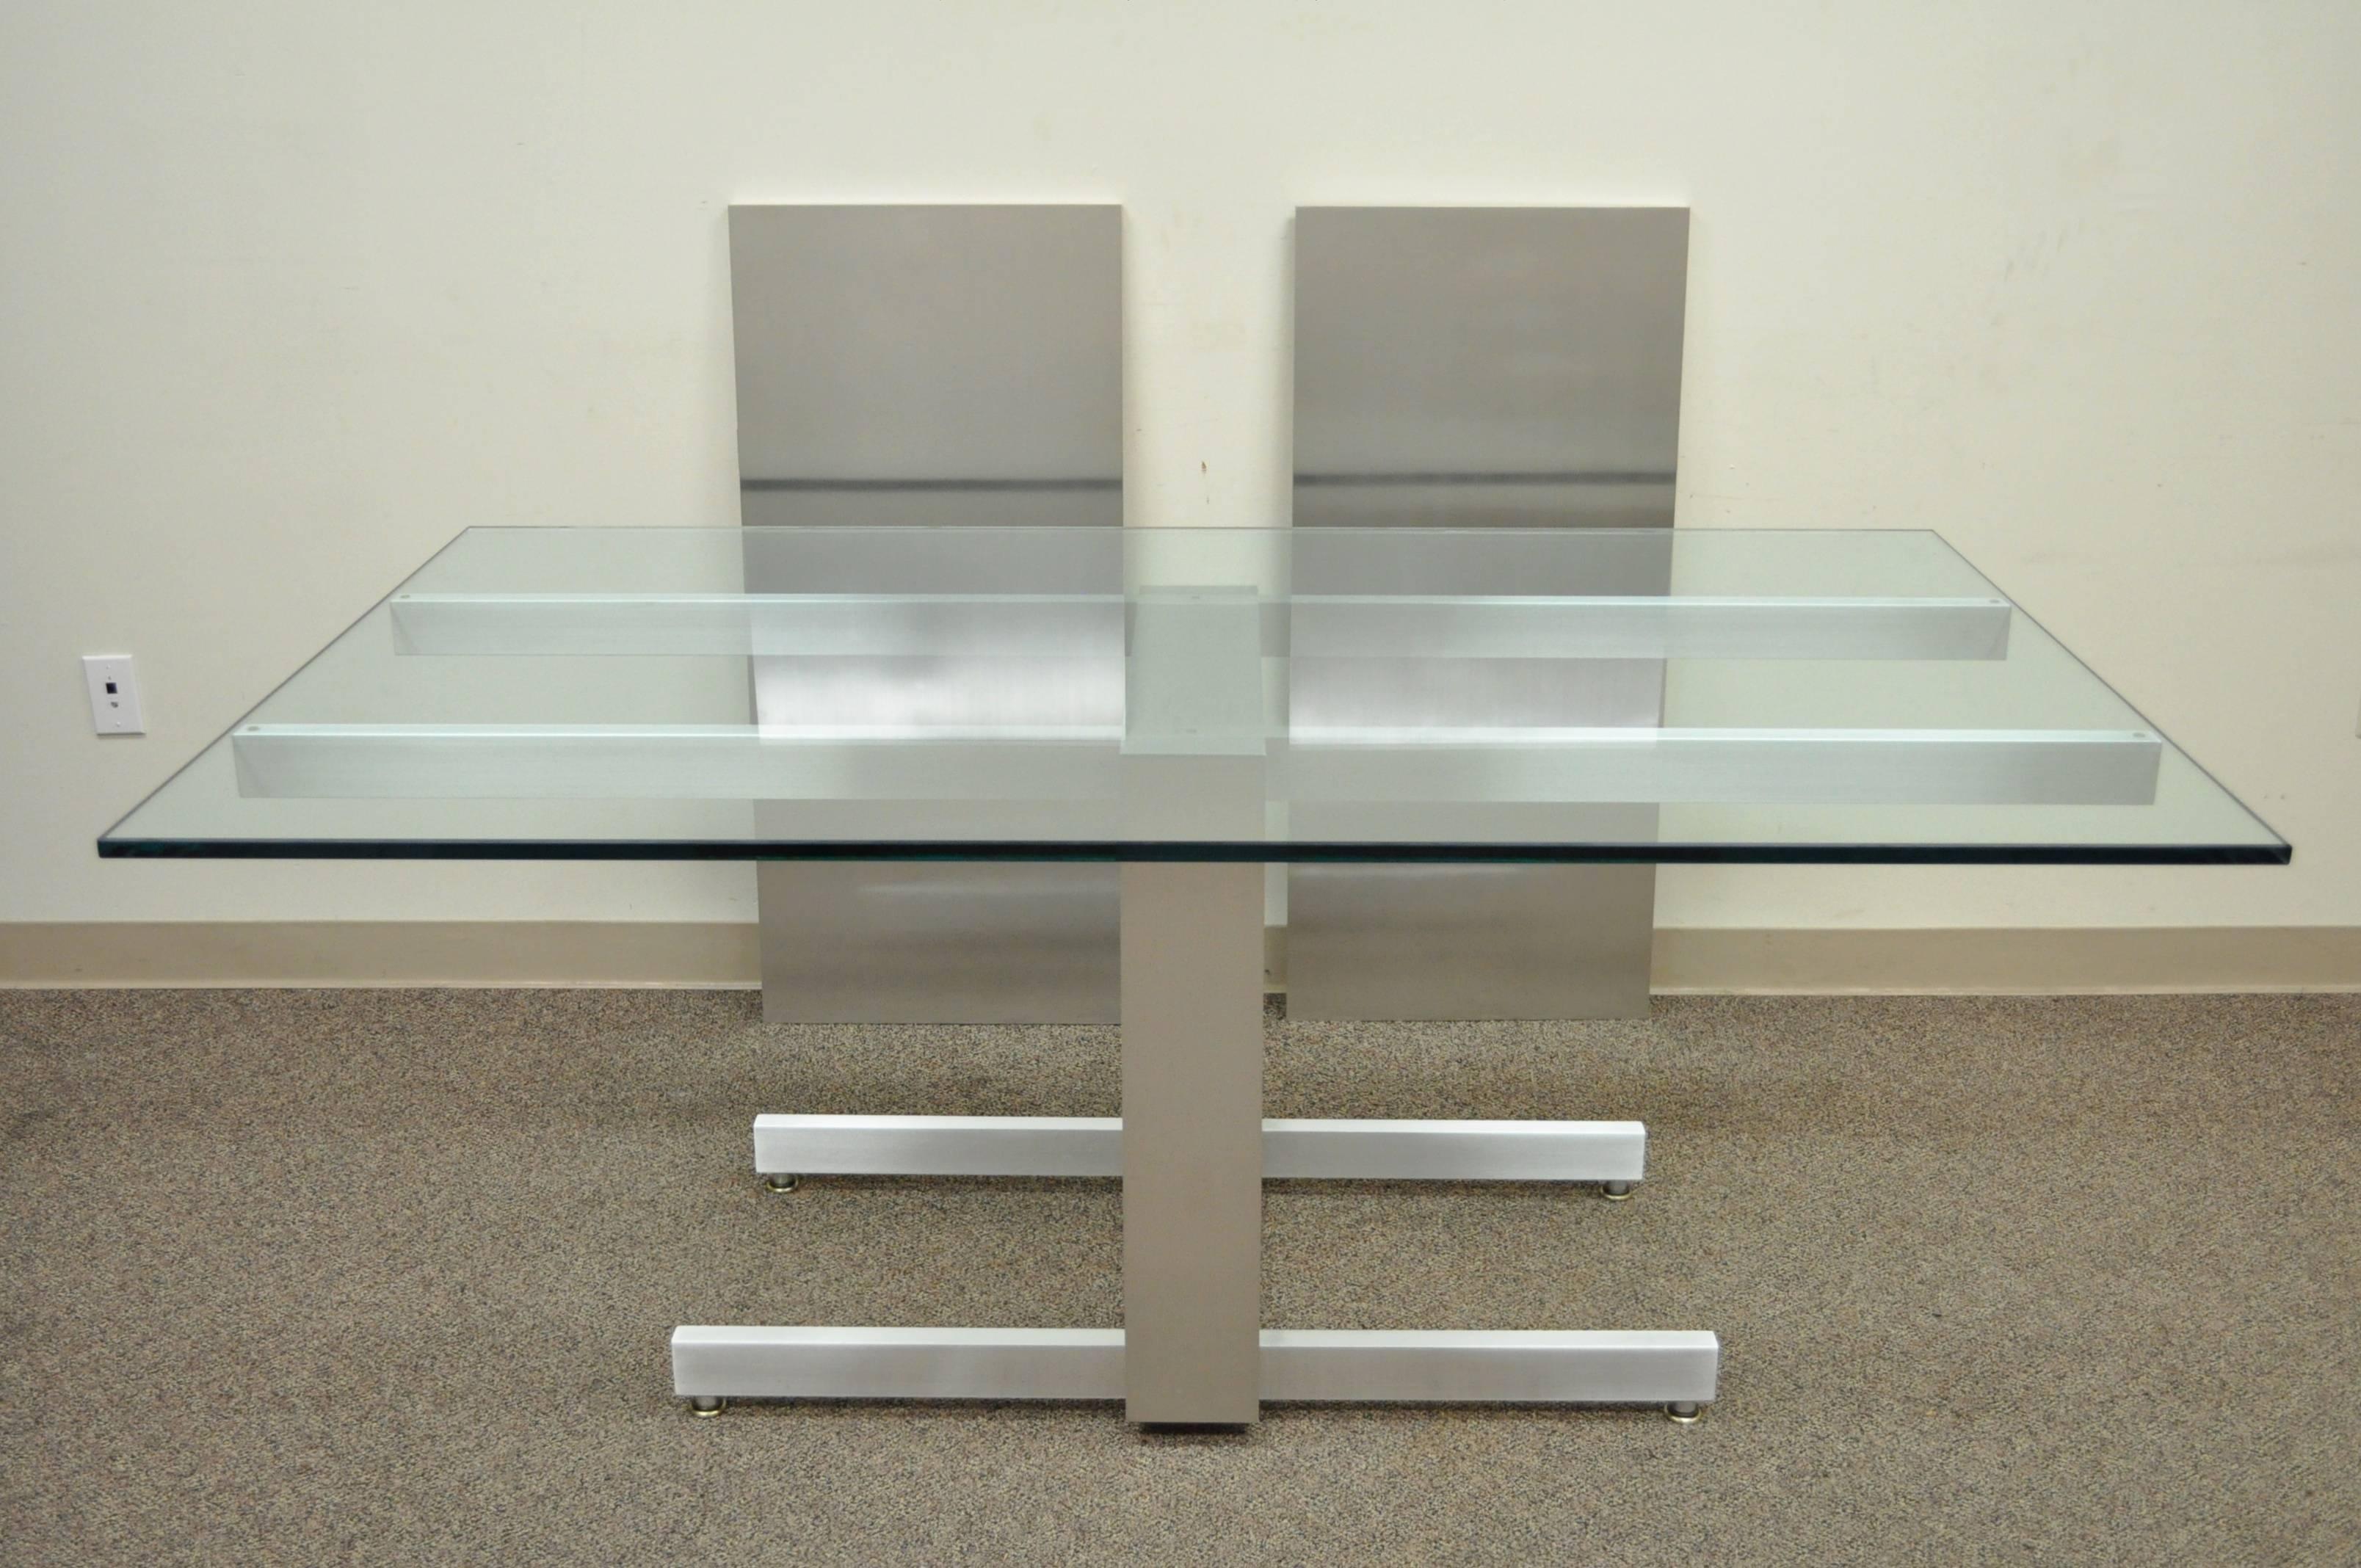 Breathtaking 1960s, Mid-Century Modern, Vladimir Kagan dining table with two leaves. Item features a brilliant brushed aluminum pedestal base with pullout / pull-out supports for the two brushed aluminum 20